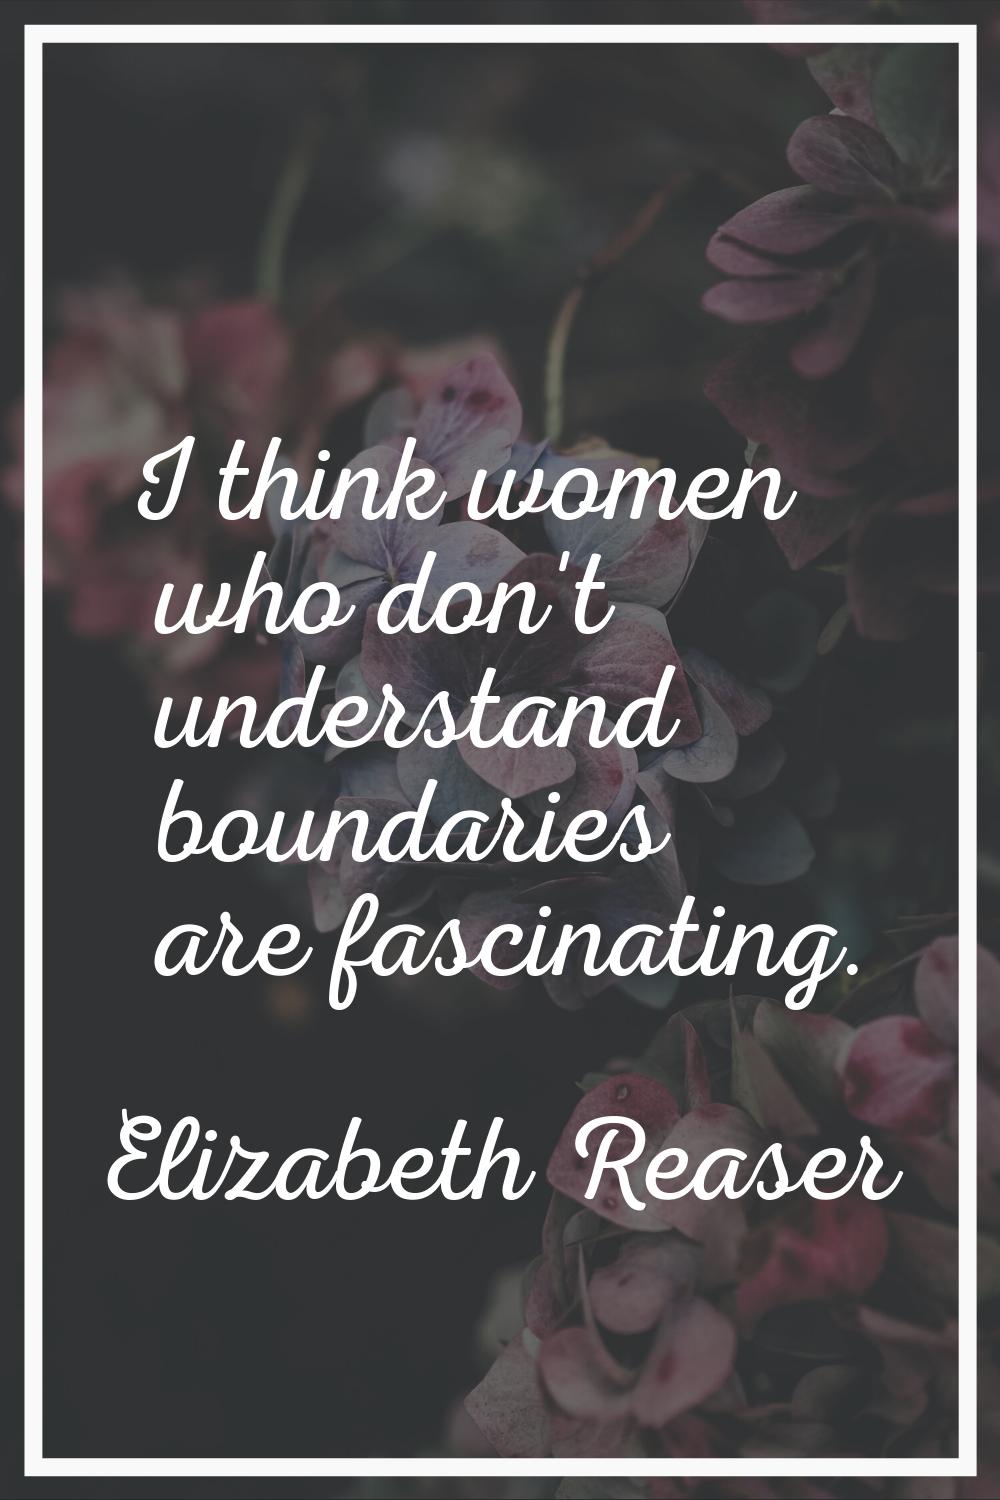 I think women who don't understand boundaries are fascinating.